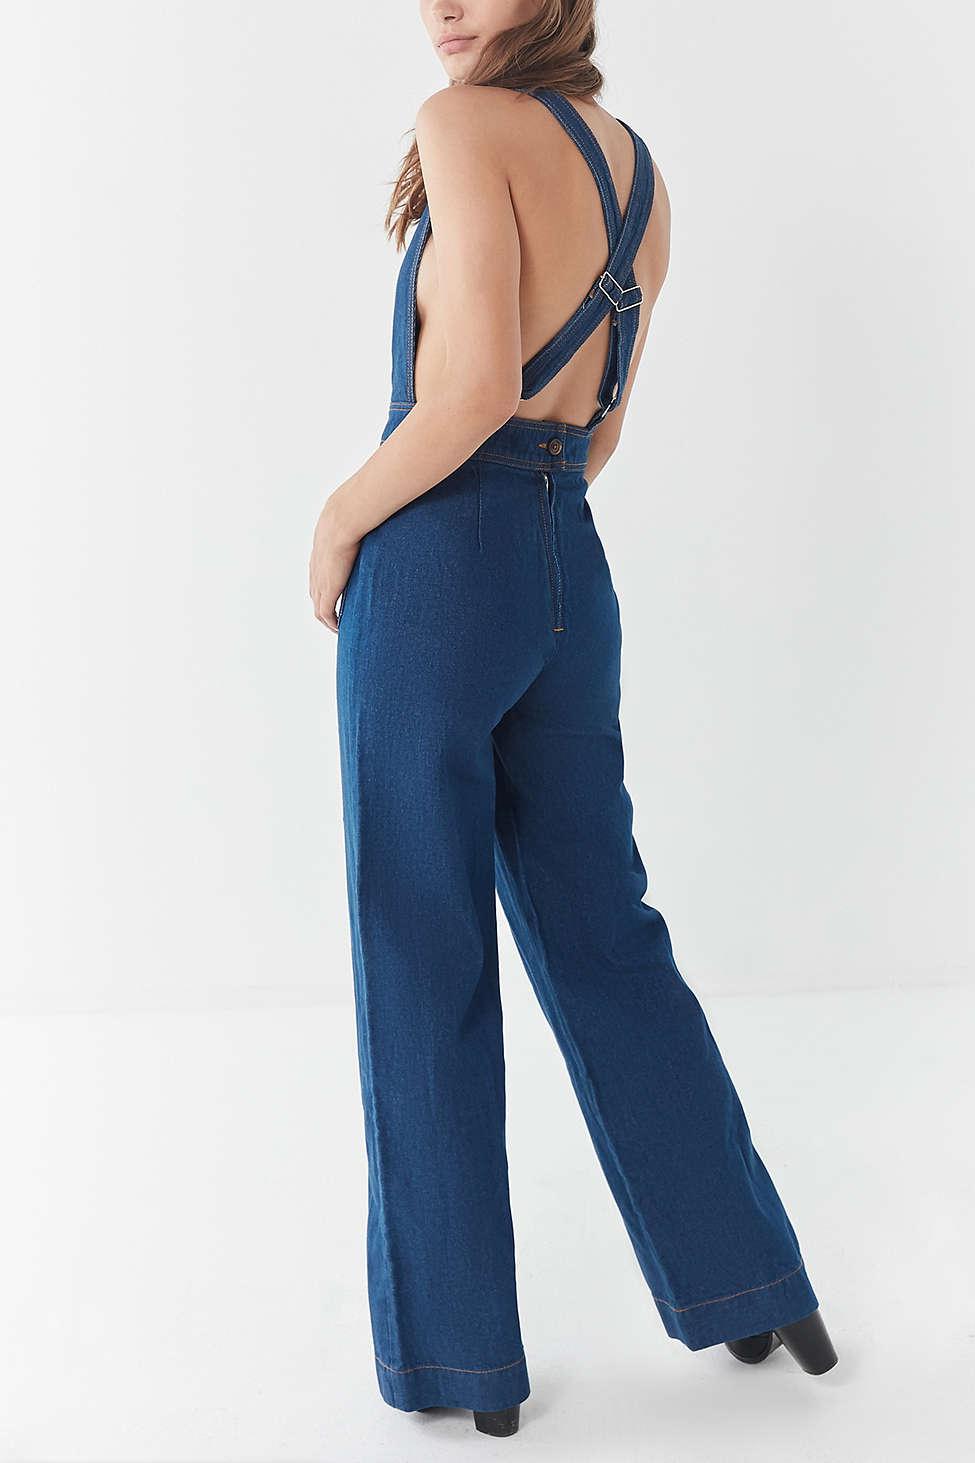 Urban Outfitters Uo Eleanor Plunging Denim Jumpsuit in Blue - Lyst